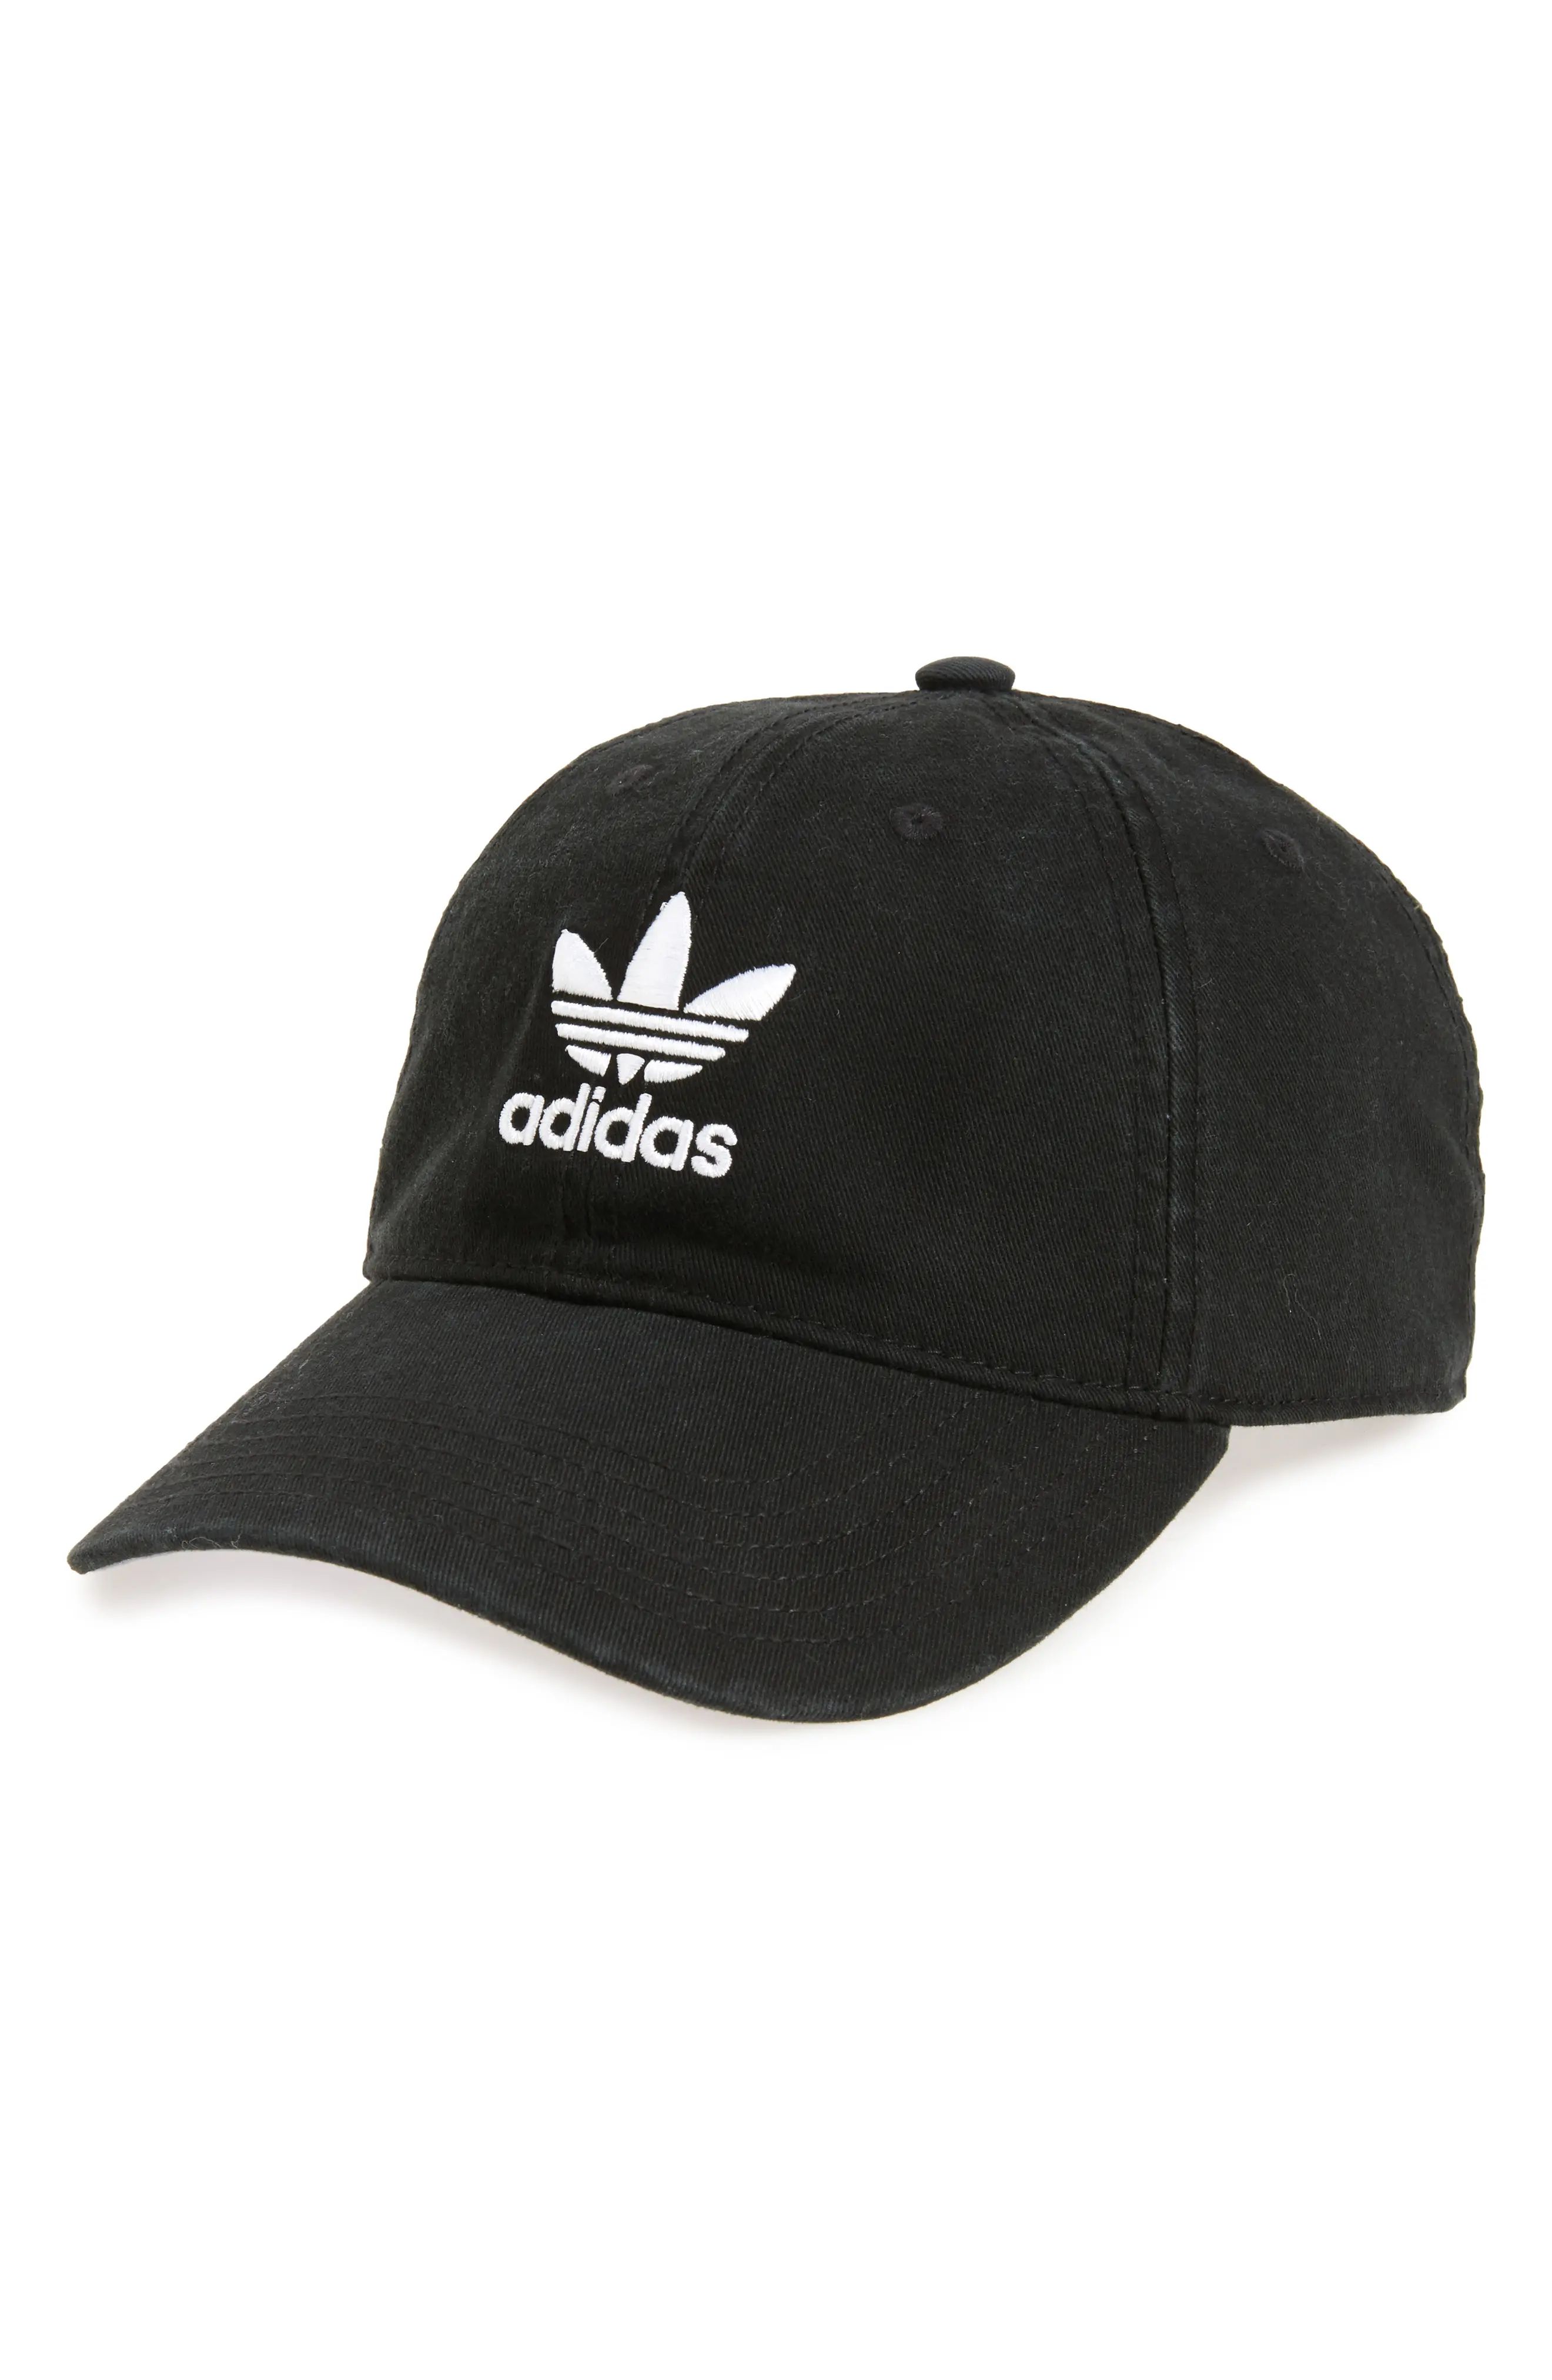 adidas Originals Relaxed Baseball Cap in Black/White at Nordstrom | Nordstrom